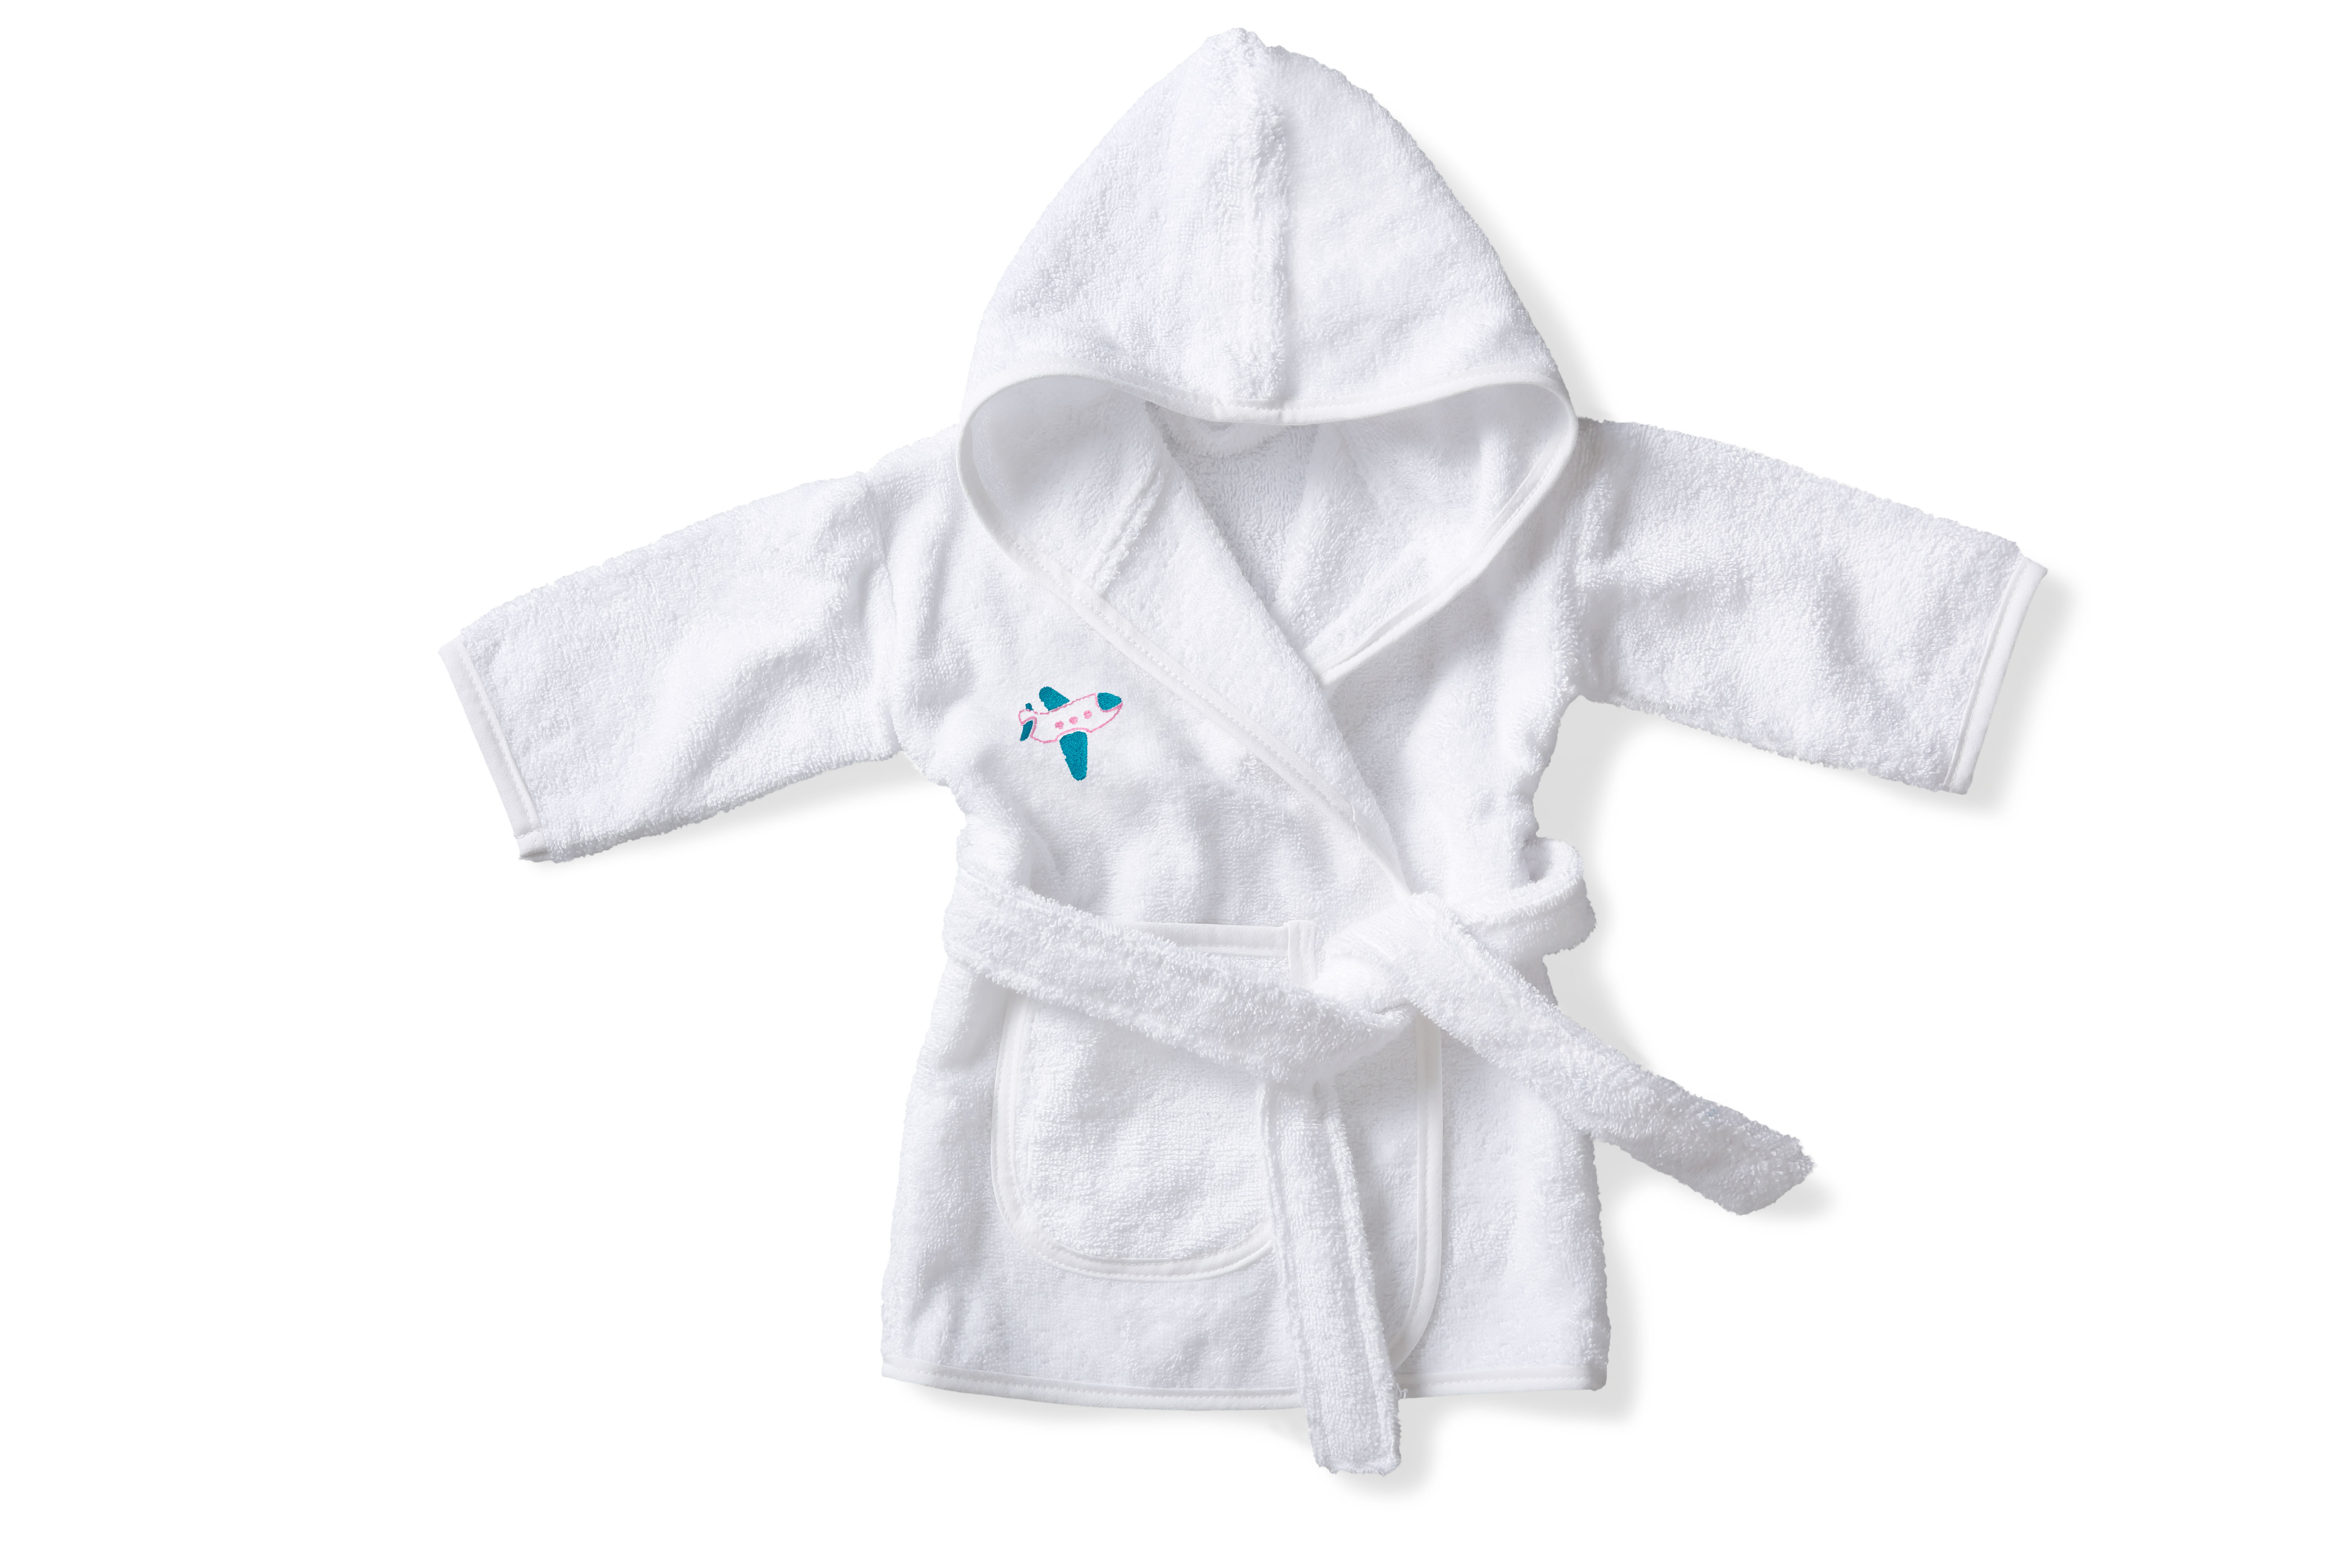 Bathrobe made of terrycloth that has been certified by Oeko-Tex Standard - Purbeck